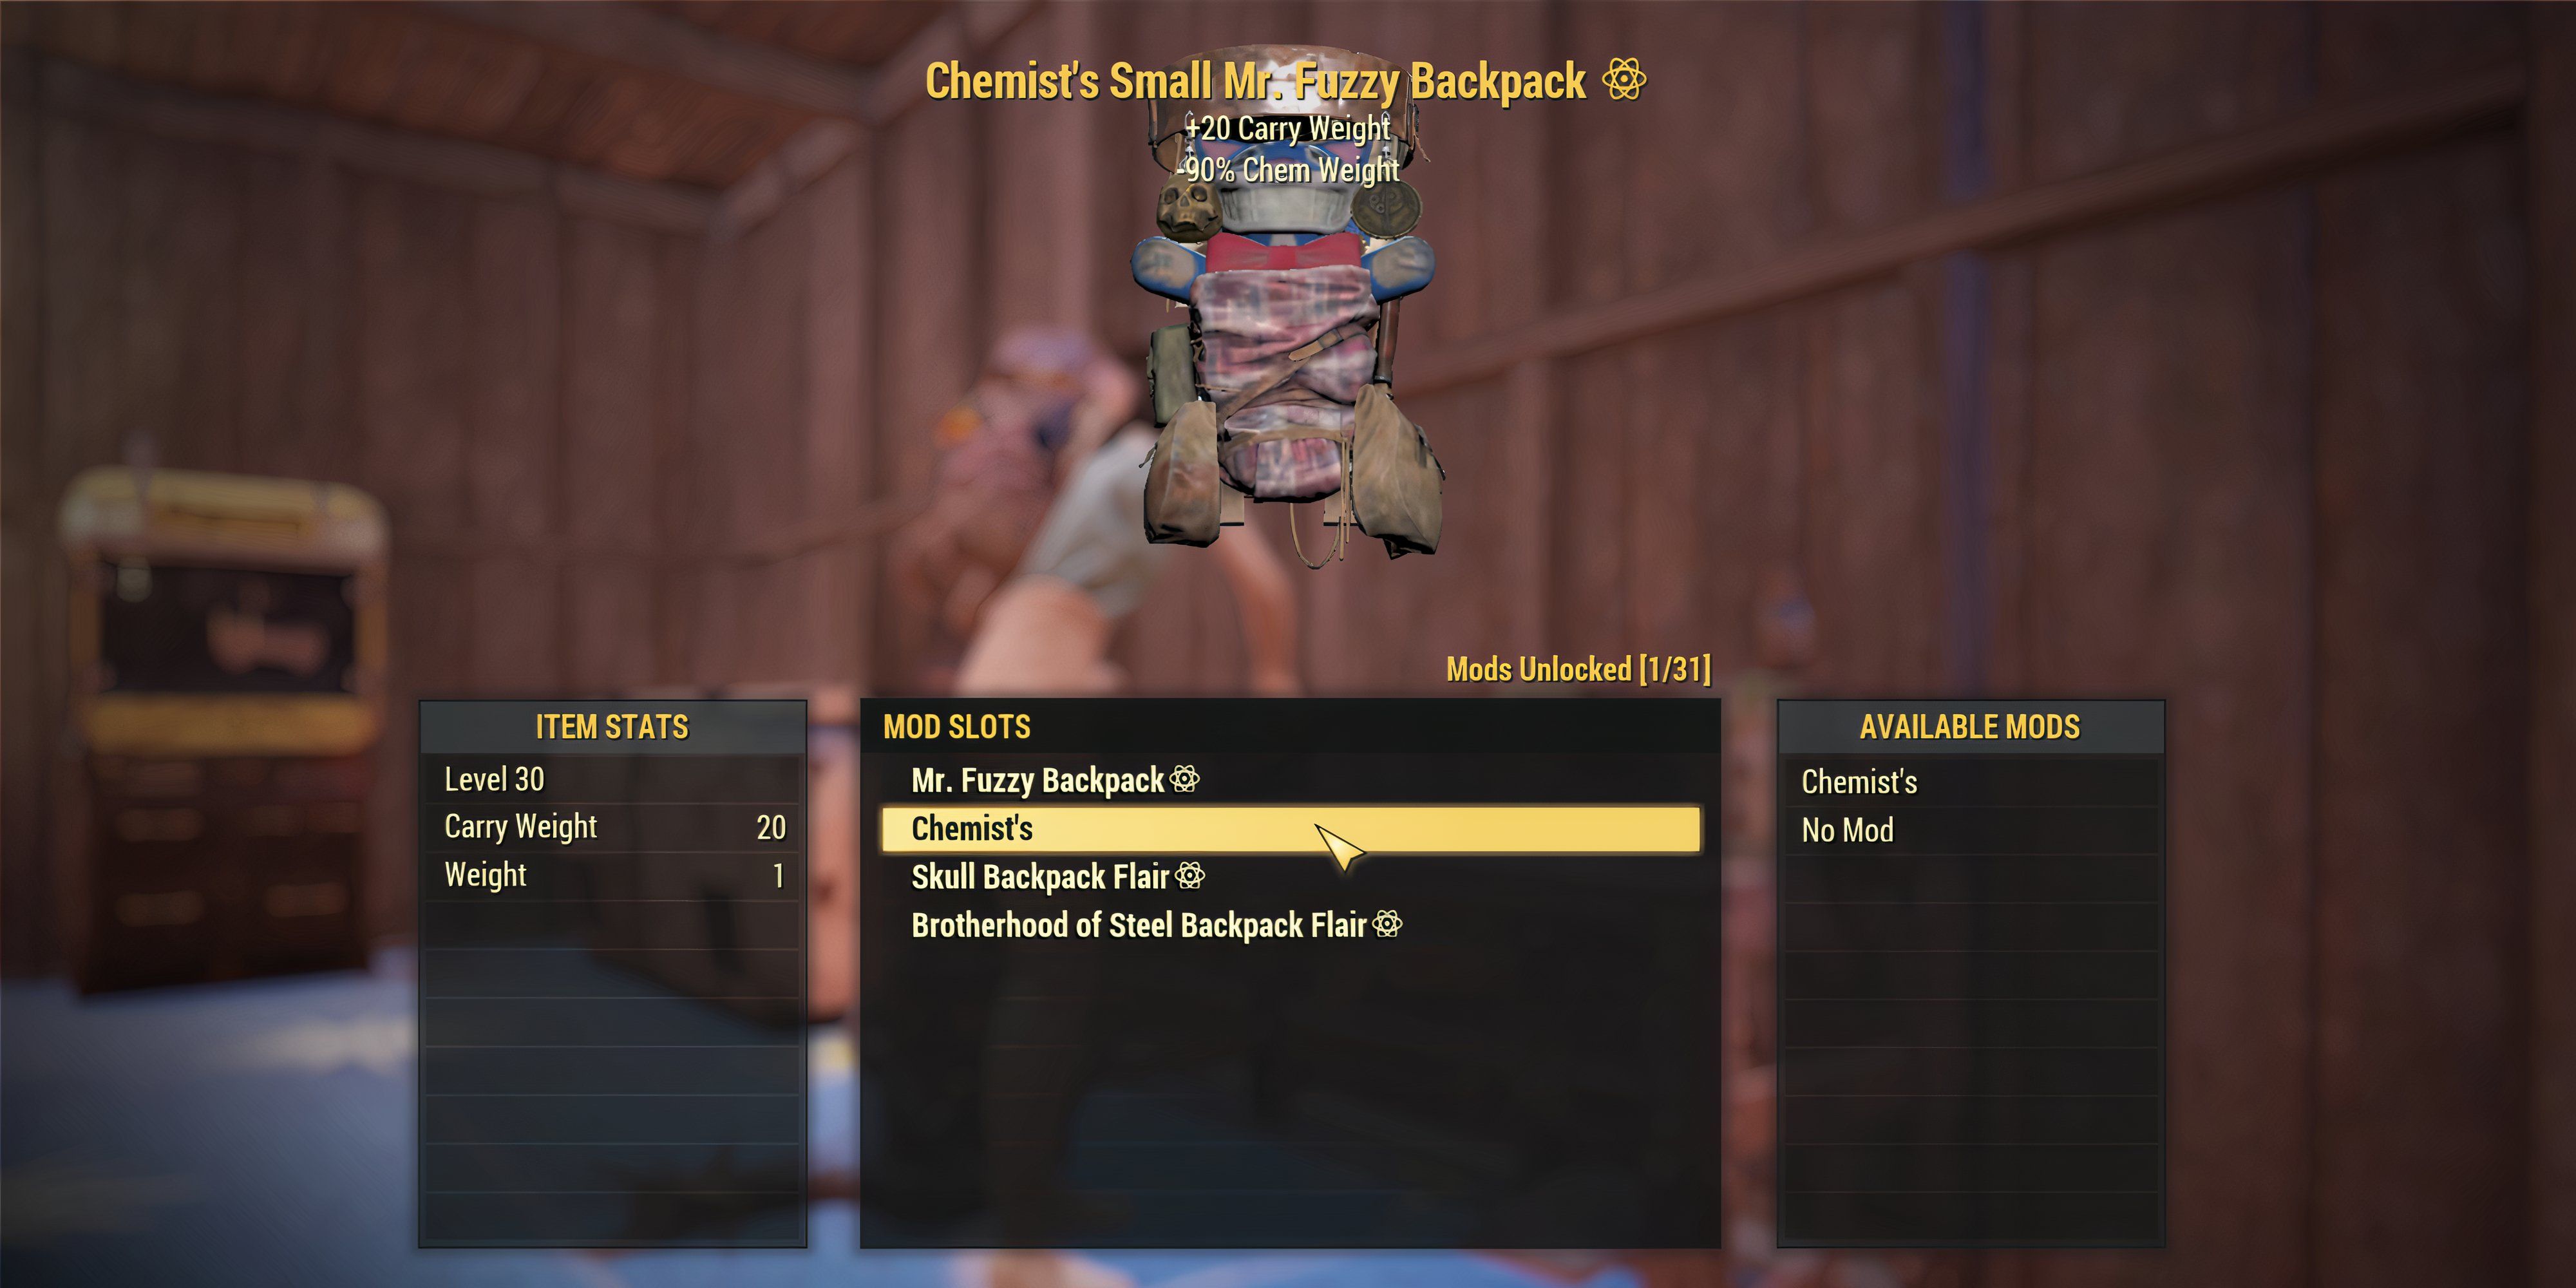 Adding Chemist's Mod to Backpack in Fallout 76